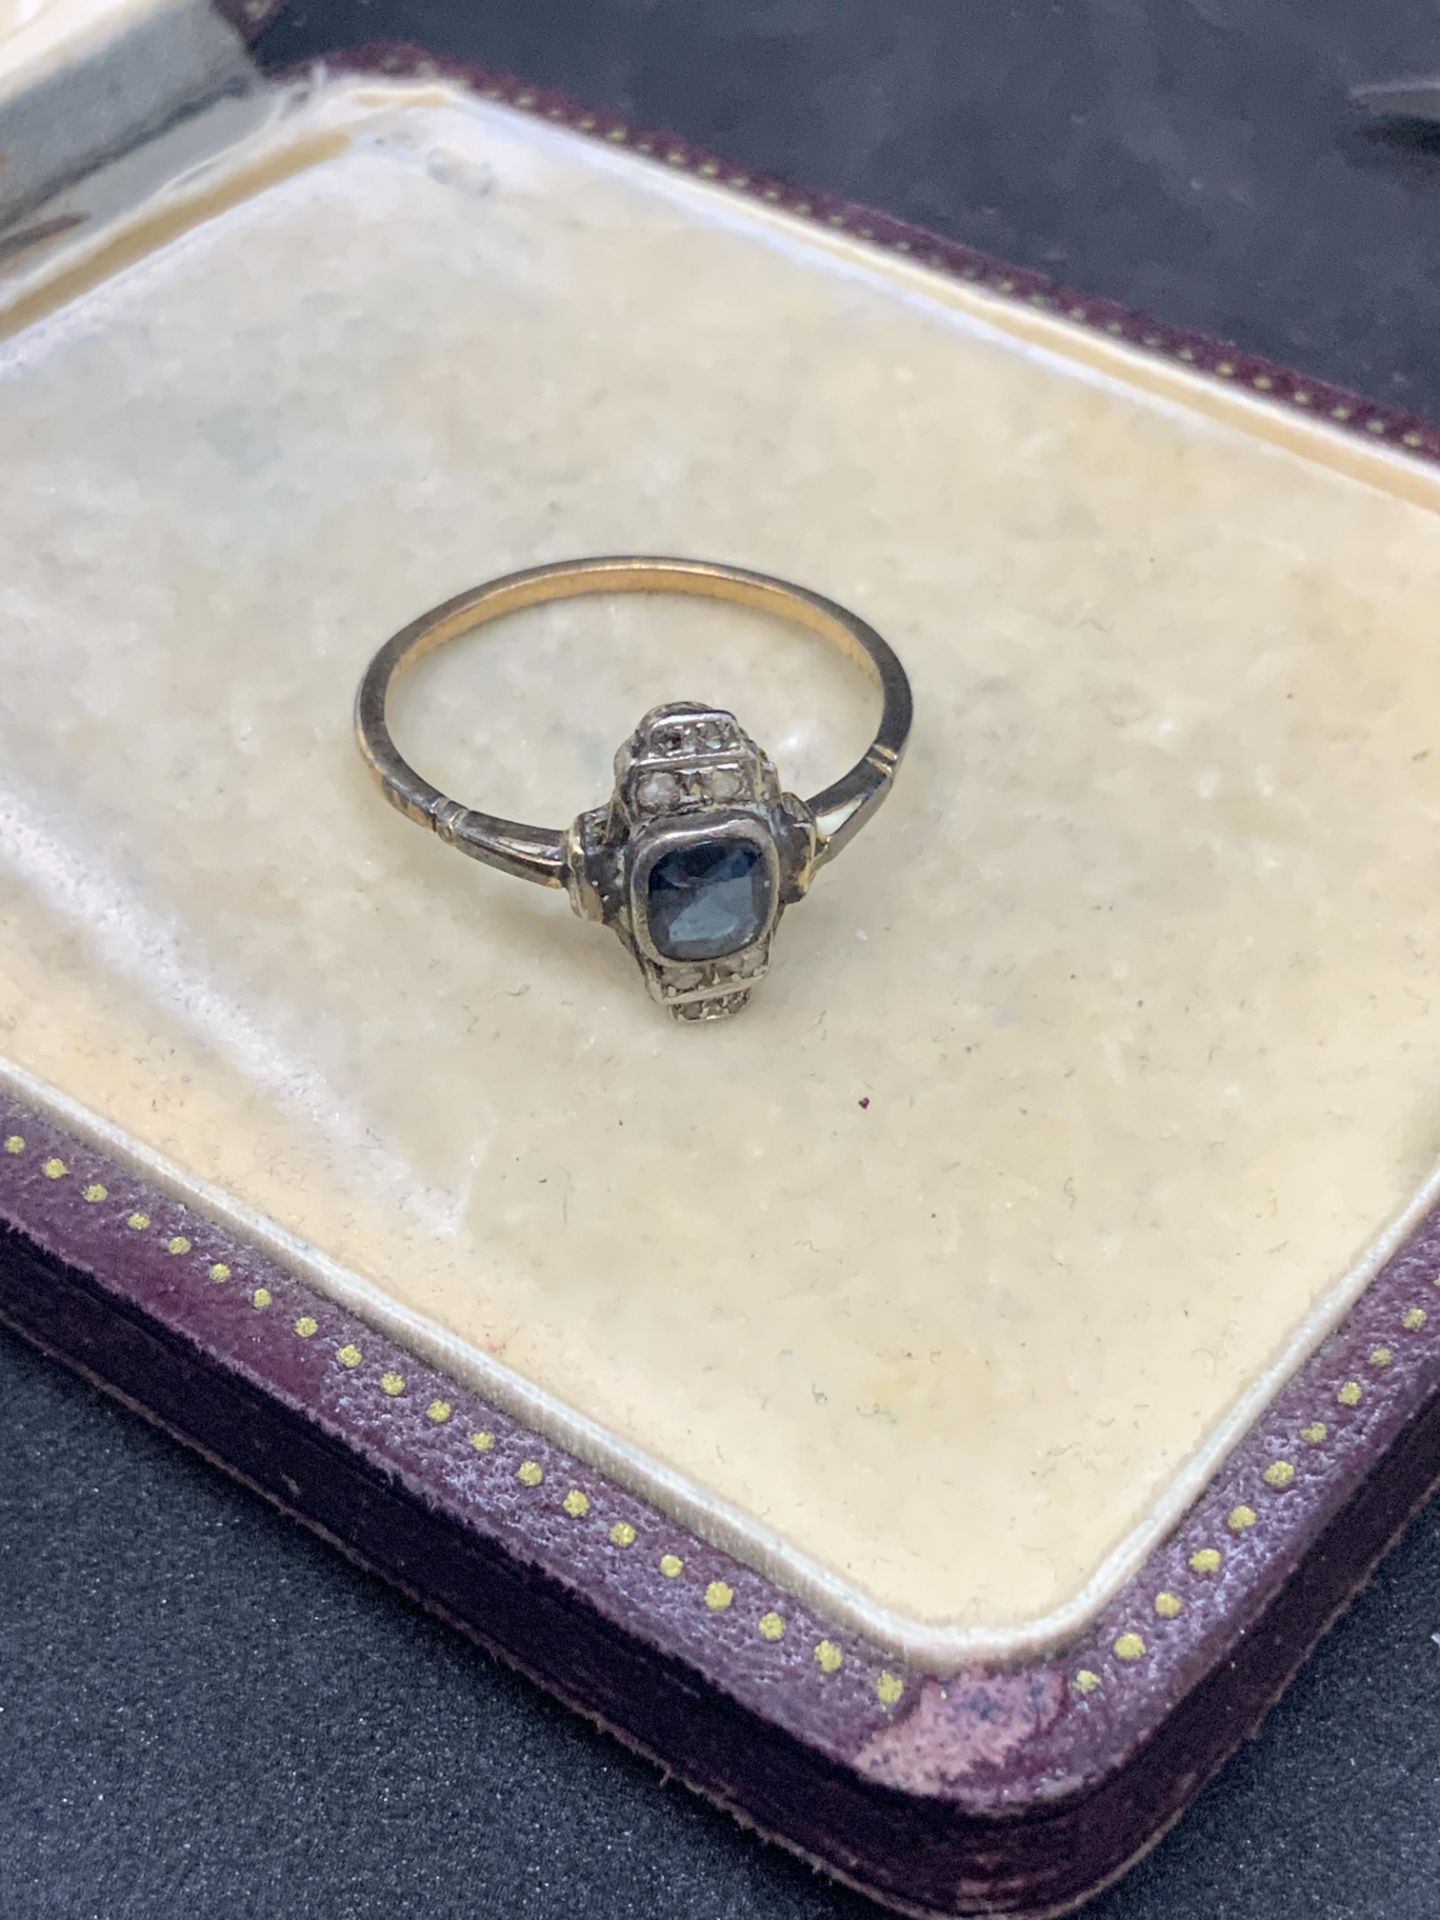 ANTIQUE SAPPHIRE & DIAMOND RING SET IN GOLD - Image 4 of 7